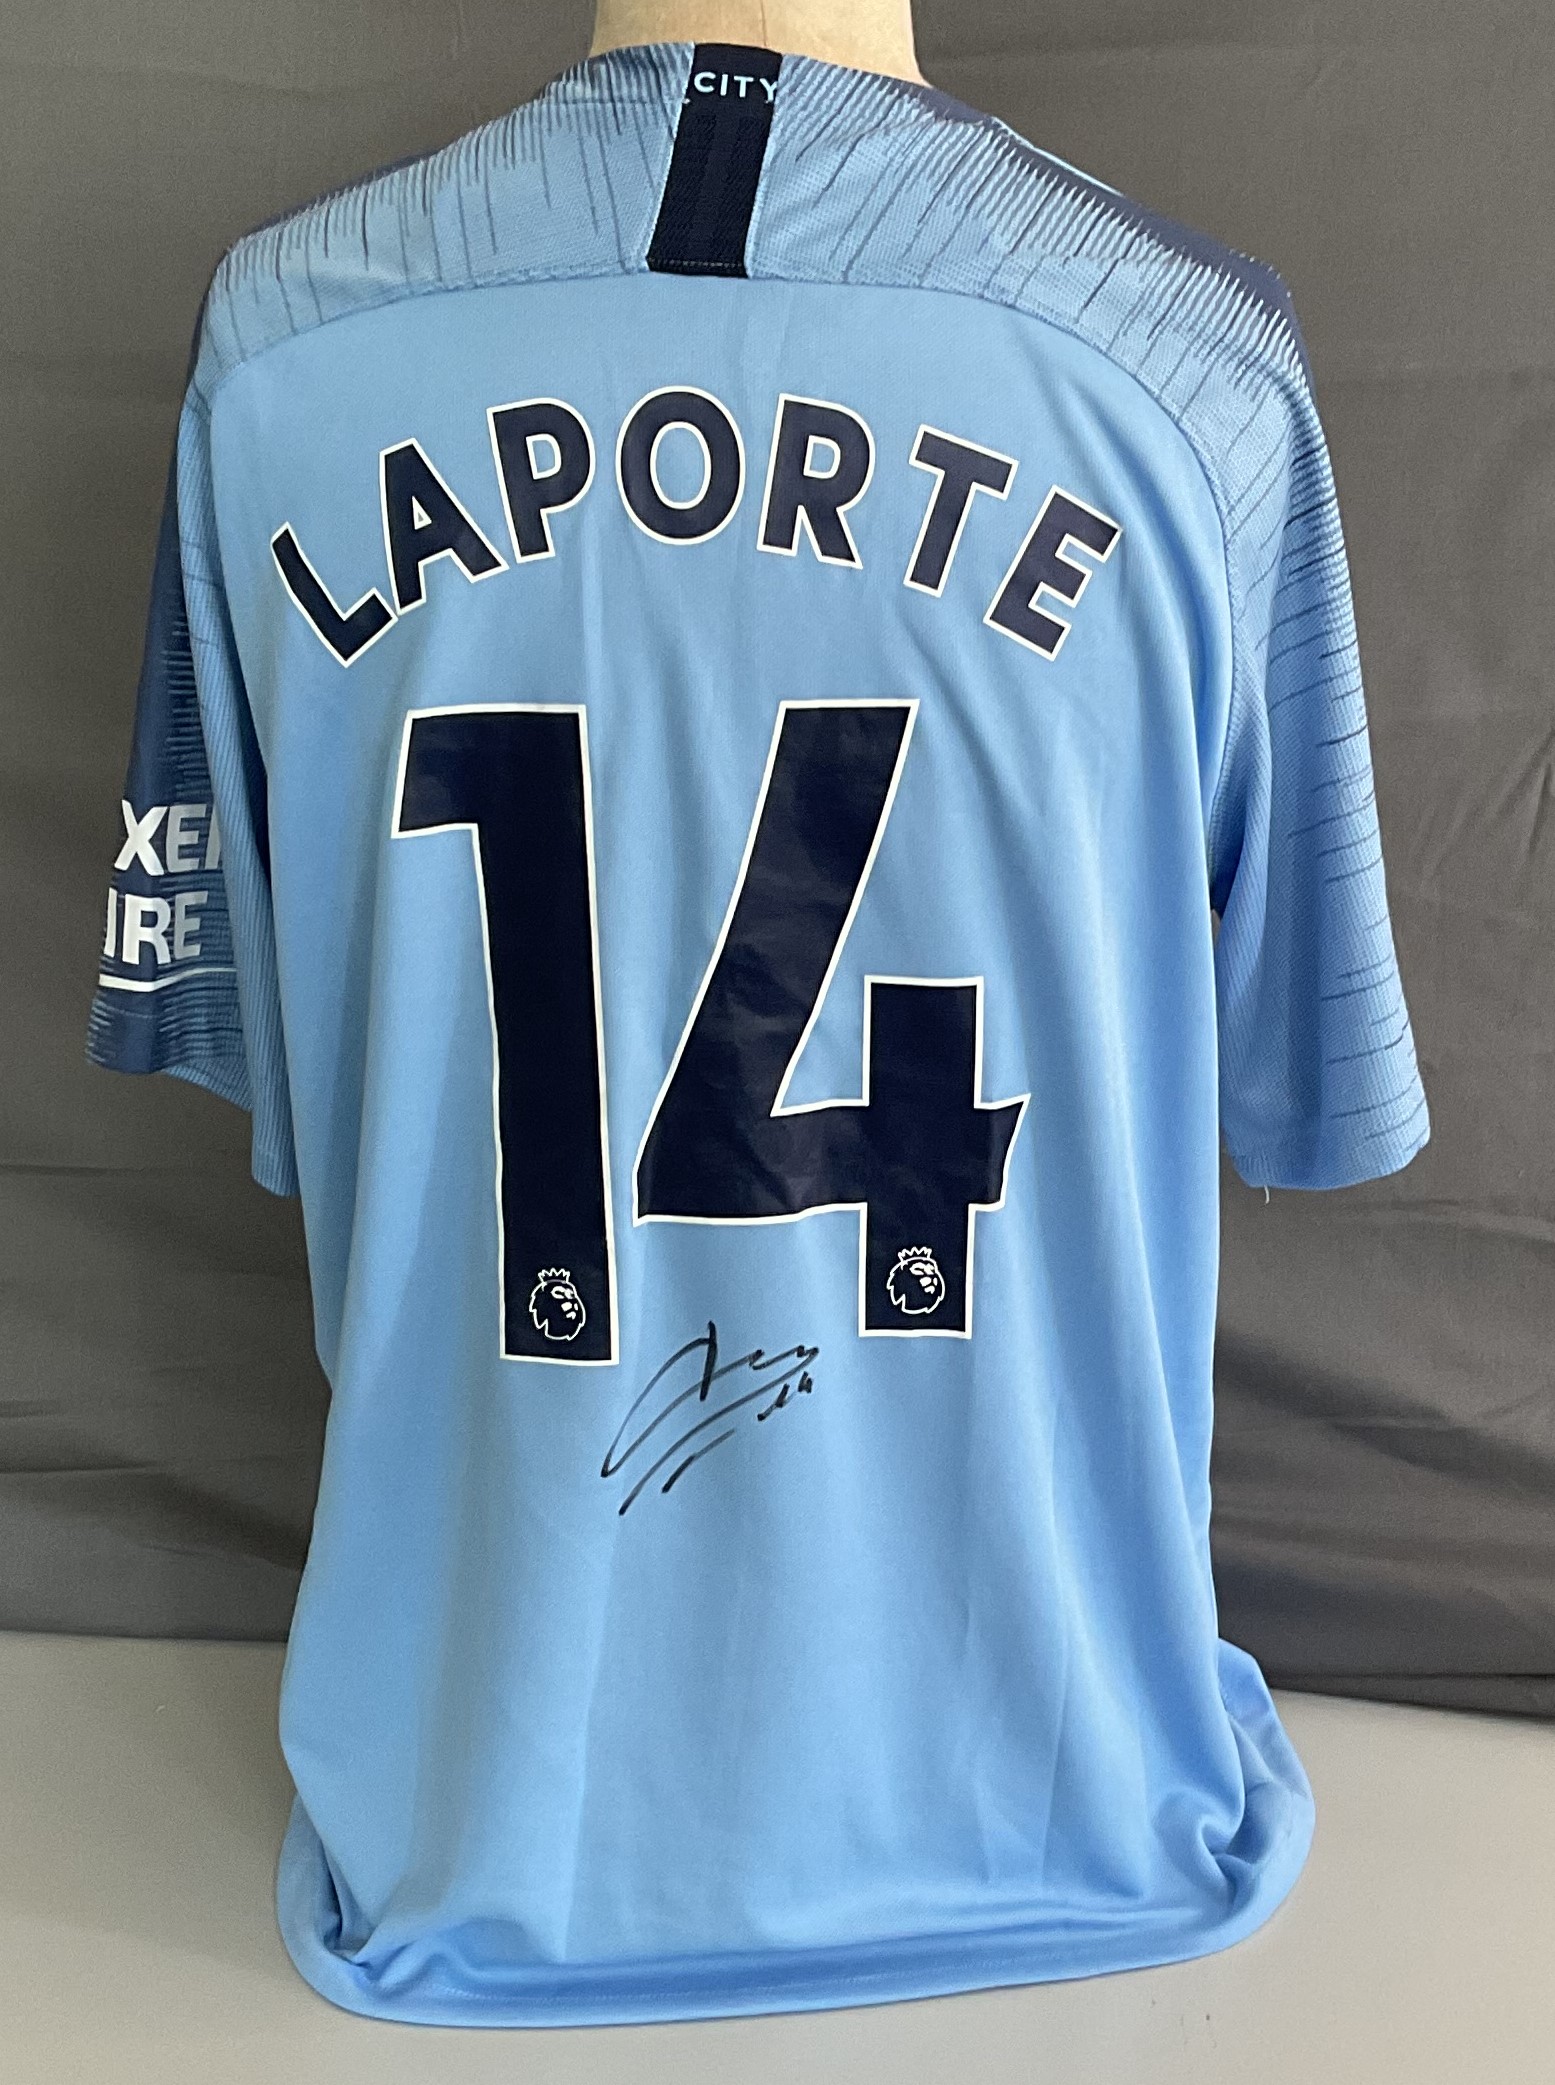 Football Aymeric Laporte Signed Size Large Man City Home Replica Shirt. Good condition. All